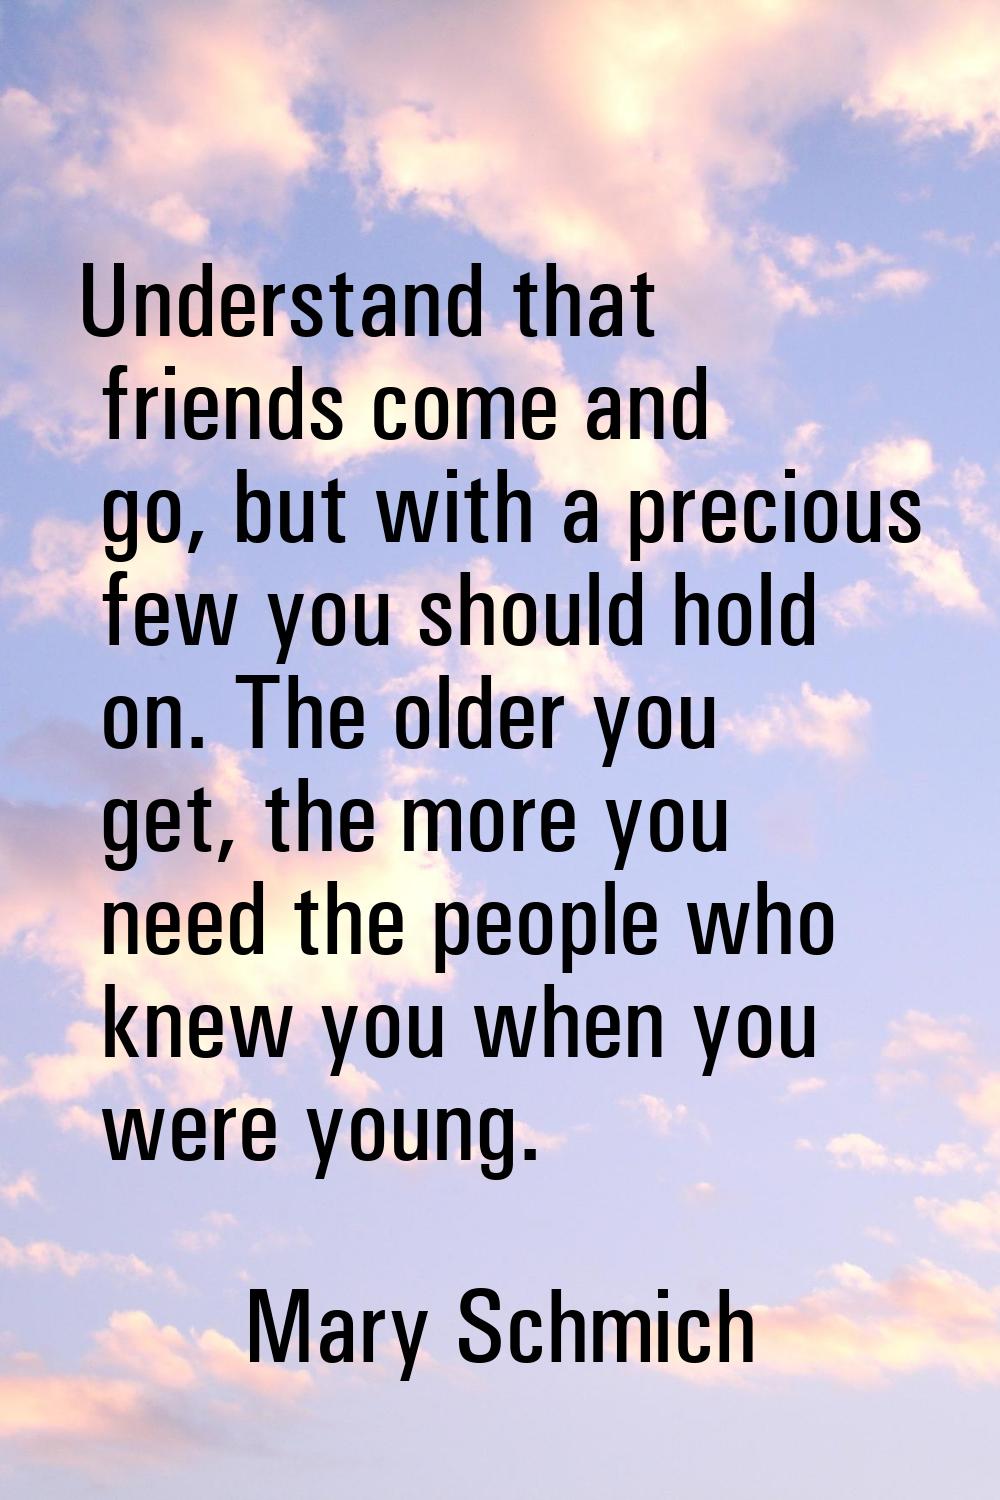 Understand that friends come and go, but with a precious few you should hold on. The older you get,